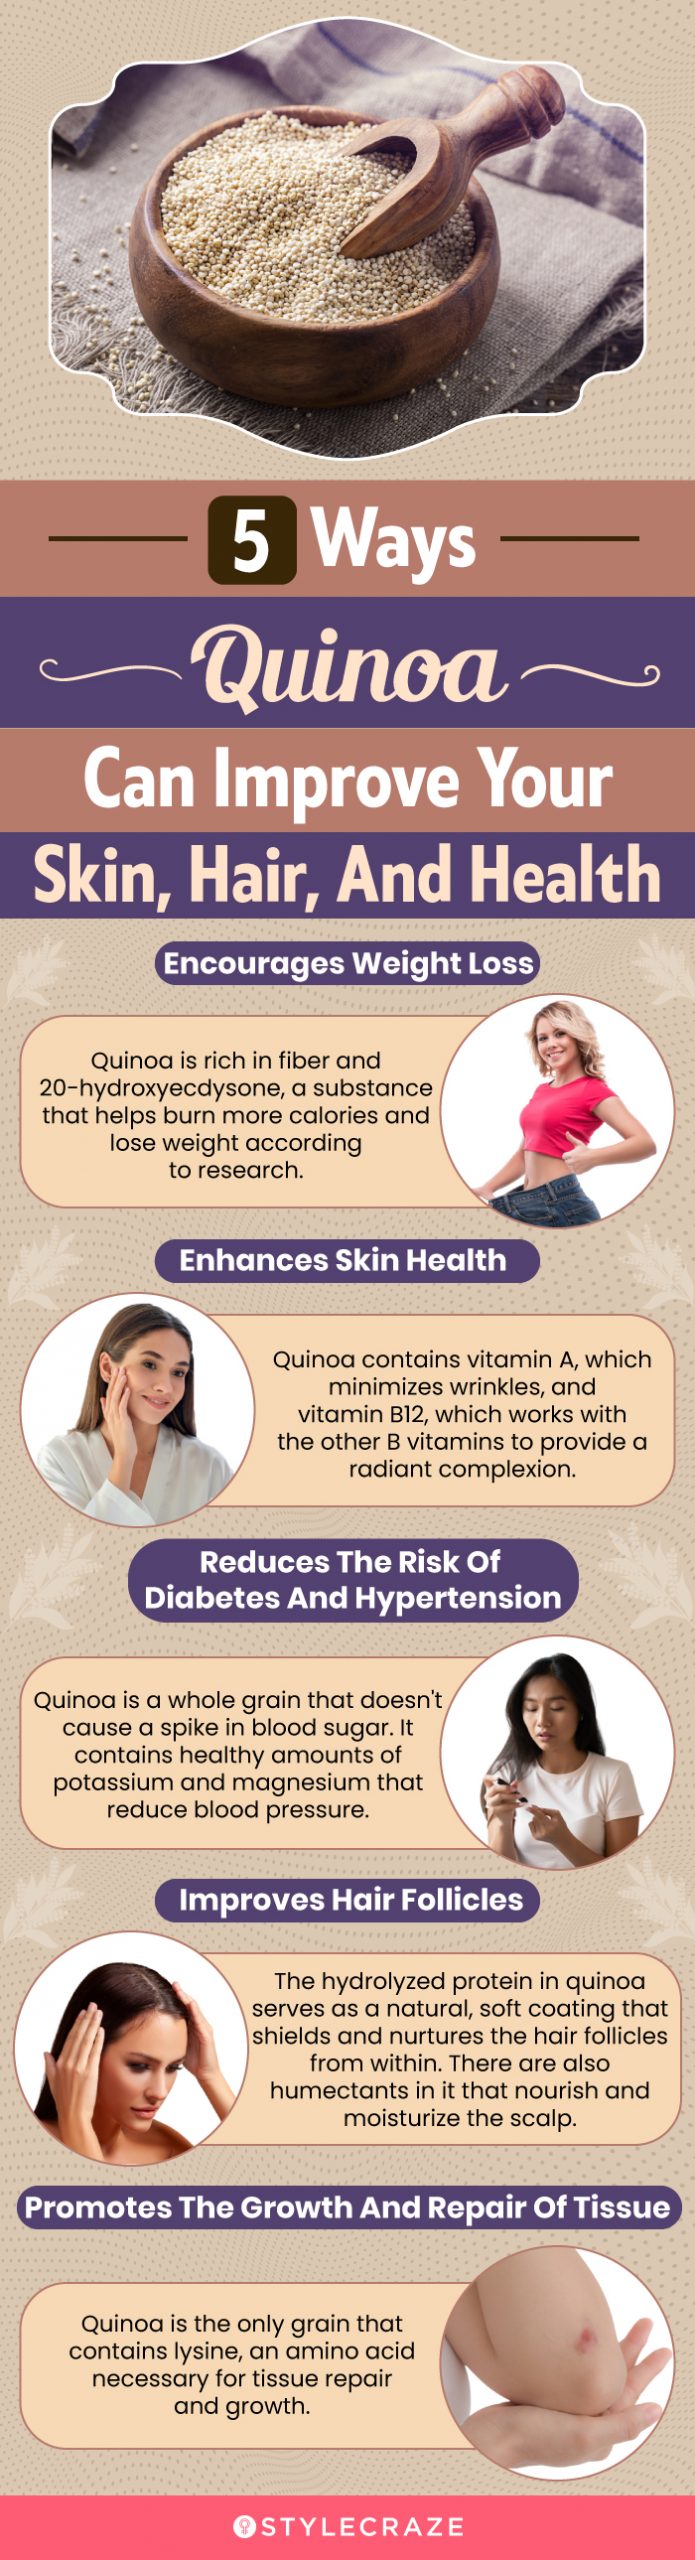 5 ways quinoa can improve your skin hair and health (infographic)